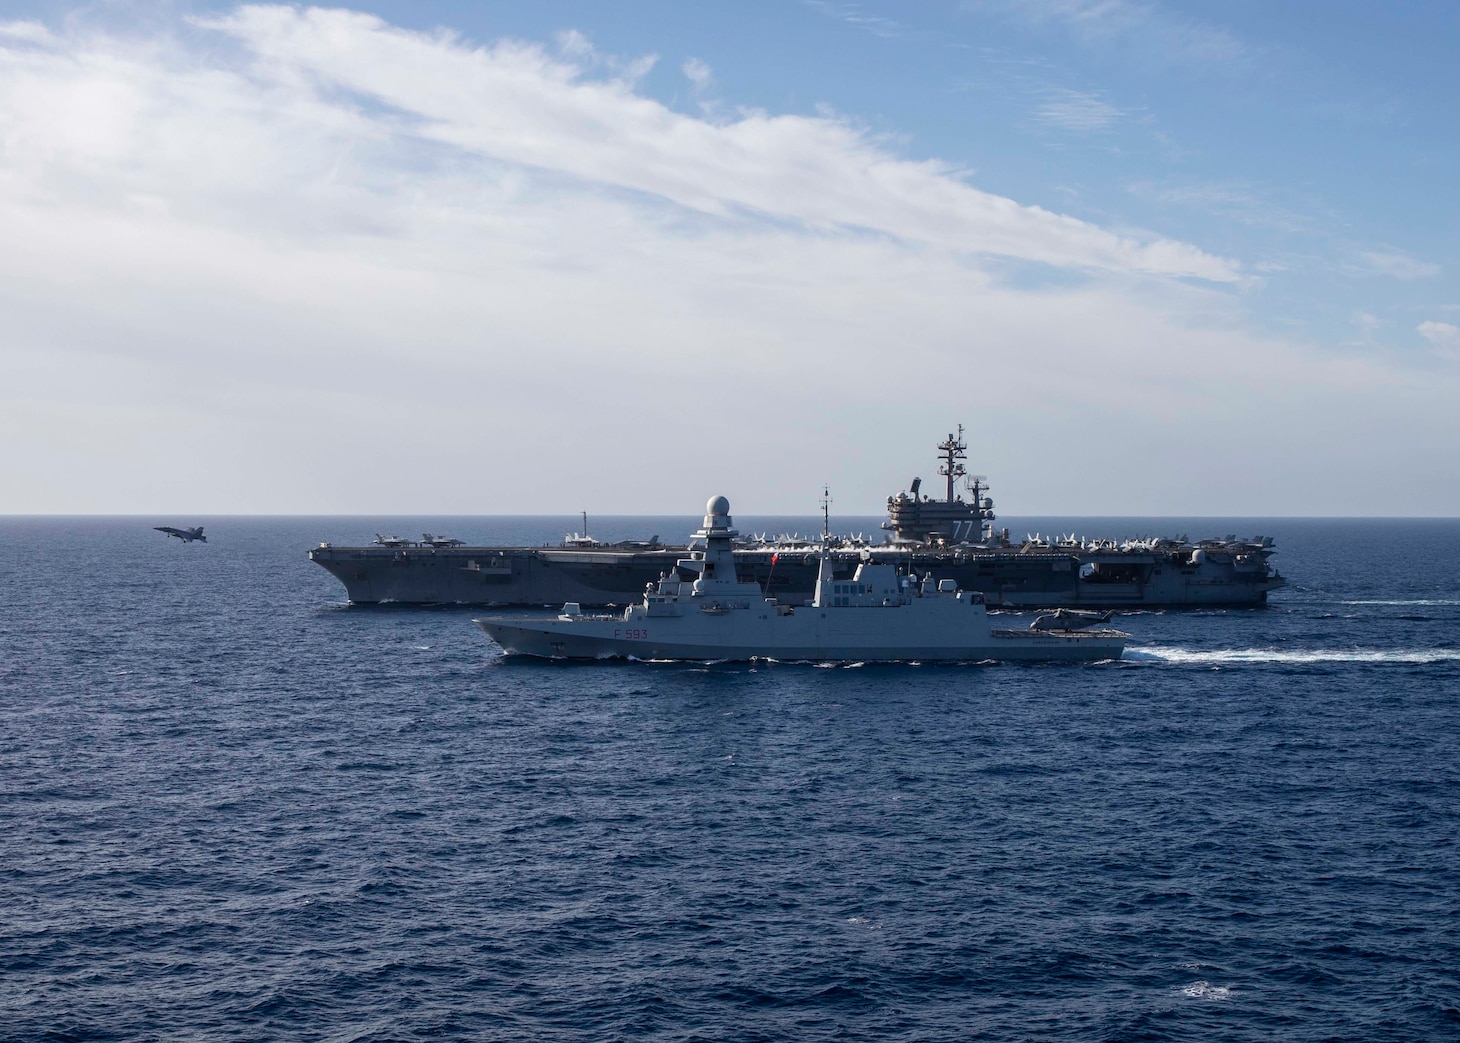 The Nimitz-class aircraft carrier USS George H.W. Bush (CVN 77) sails alongside the Italian Navy Carlo Bergamini-class frigate ITS Carabiniere (F 593) while an F/A-18 Super Hornet aircraft, assigned to Carrier Air Wing  (CVW) 7, takes off during combined operations in the Tyrrhenian Sea, Dec. 6, 2022. The George H.W. Bush Strike Group is on a scheduled deployment in the U.S. Naval Forces Europe area of operations, employed by U.S. Sixth Fleet to defend U.S., allied, and partner interests.